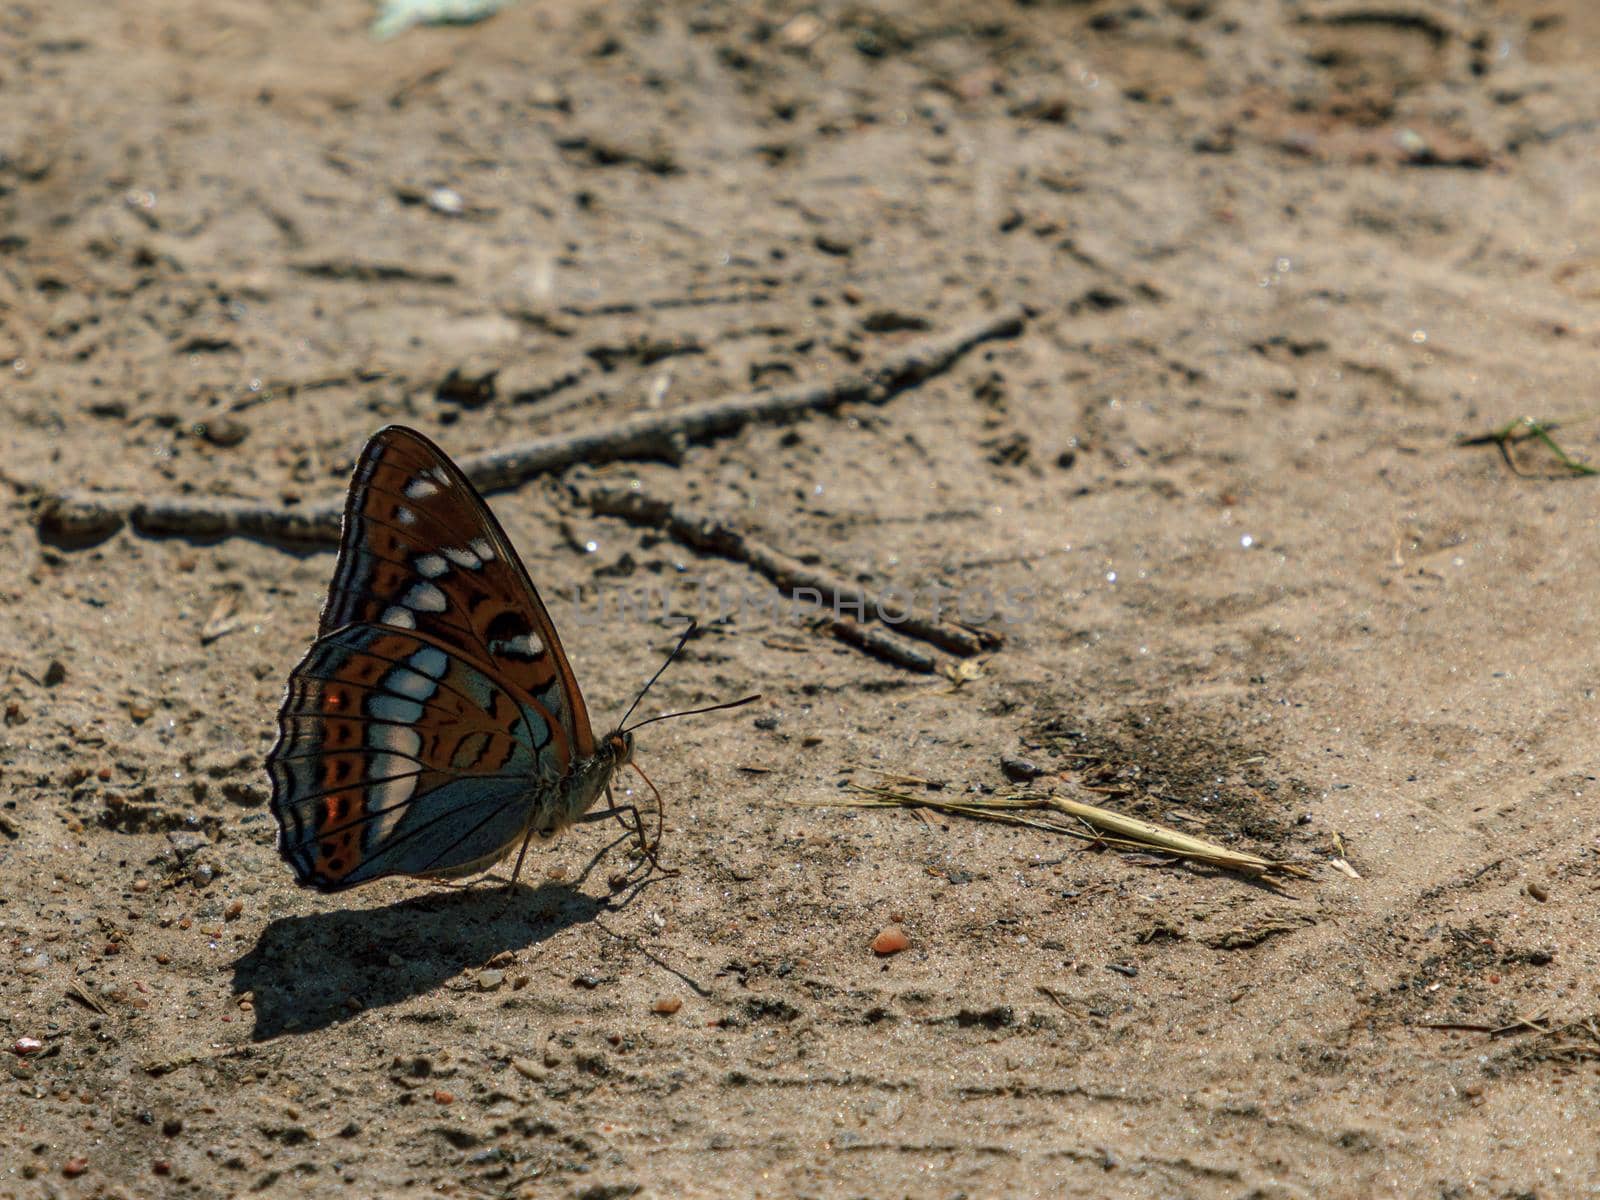 Brown and orange
variegated color butterfly in sand, with shadow